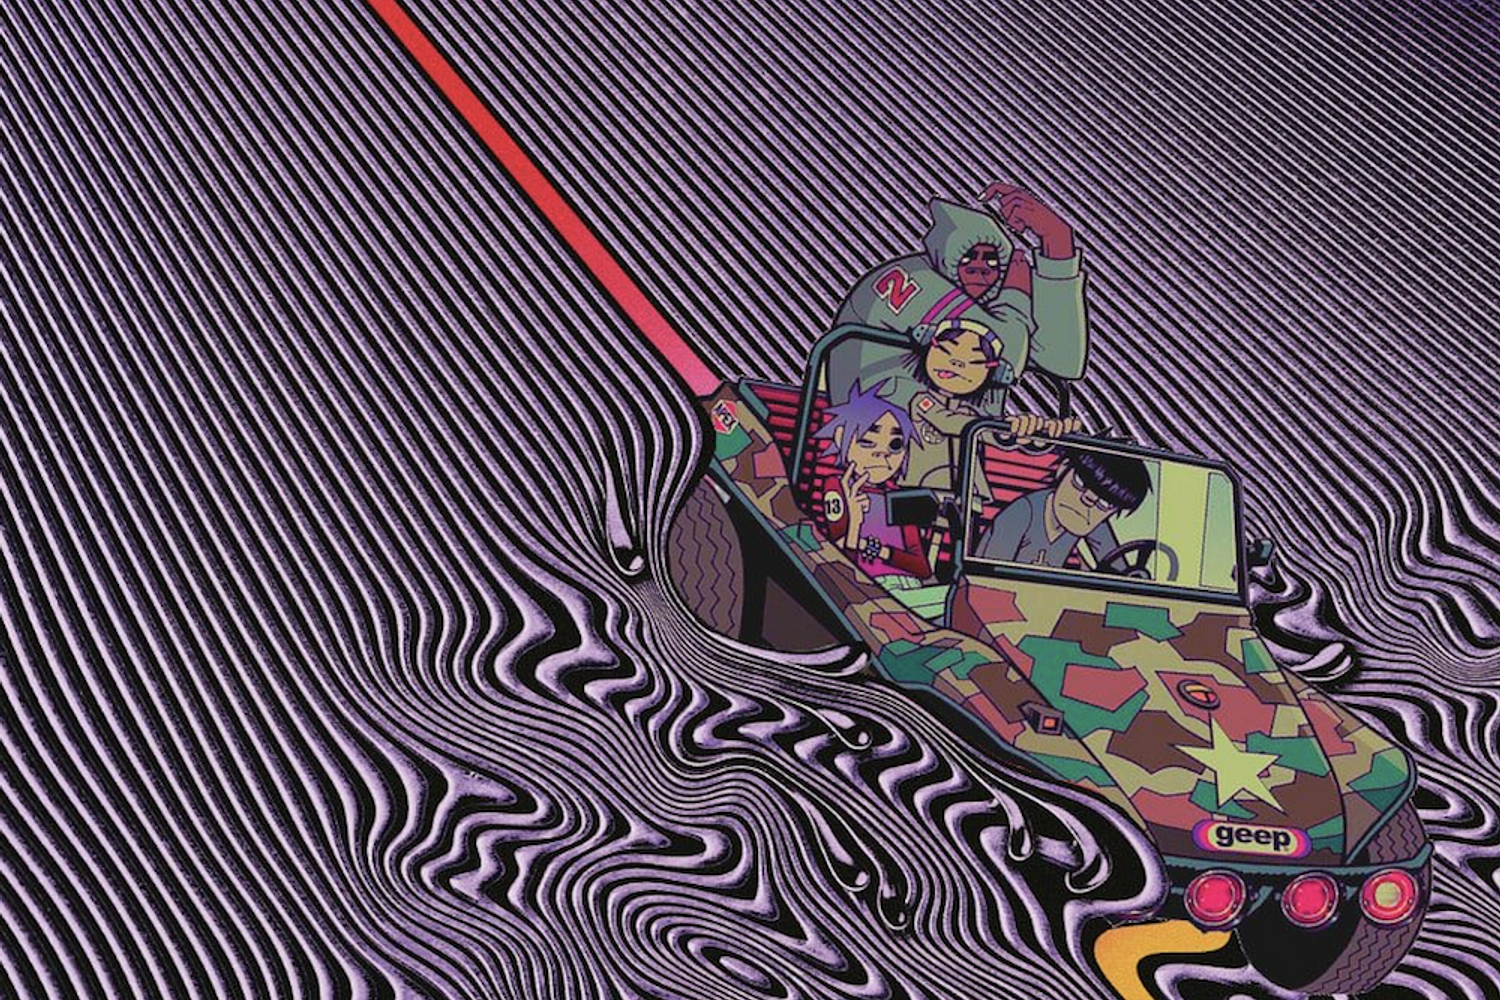 Are Gorillaz teaming up with Tame Impala?